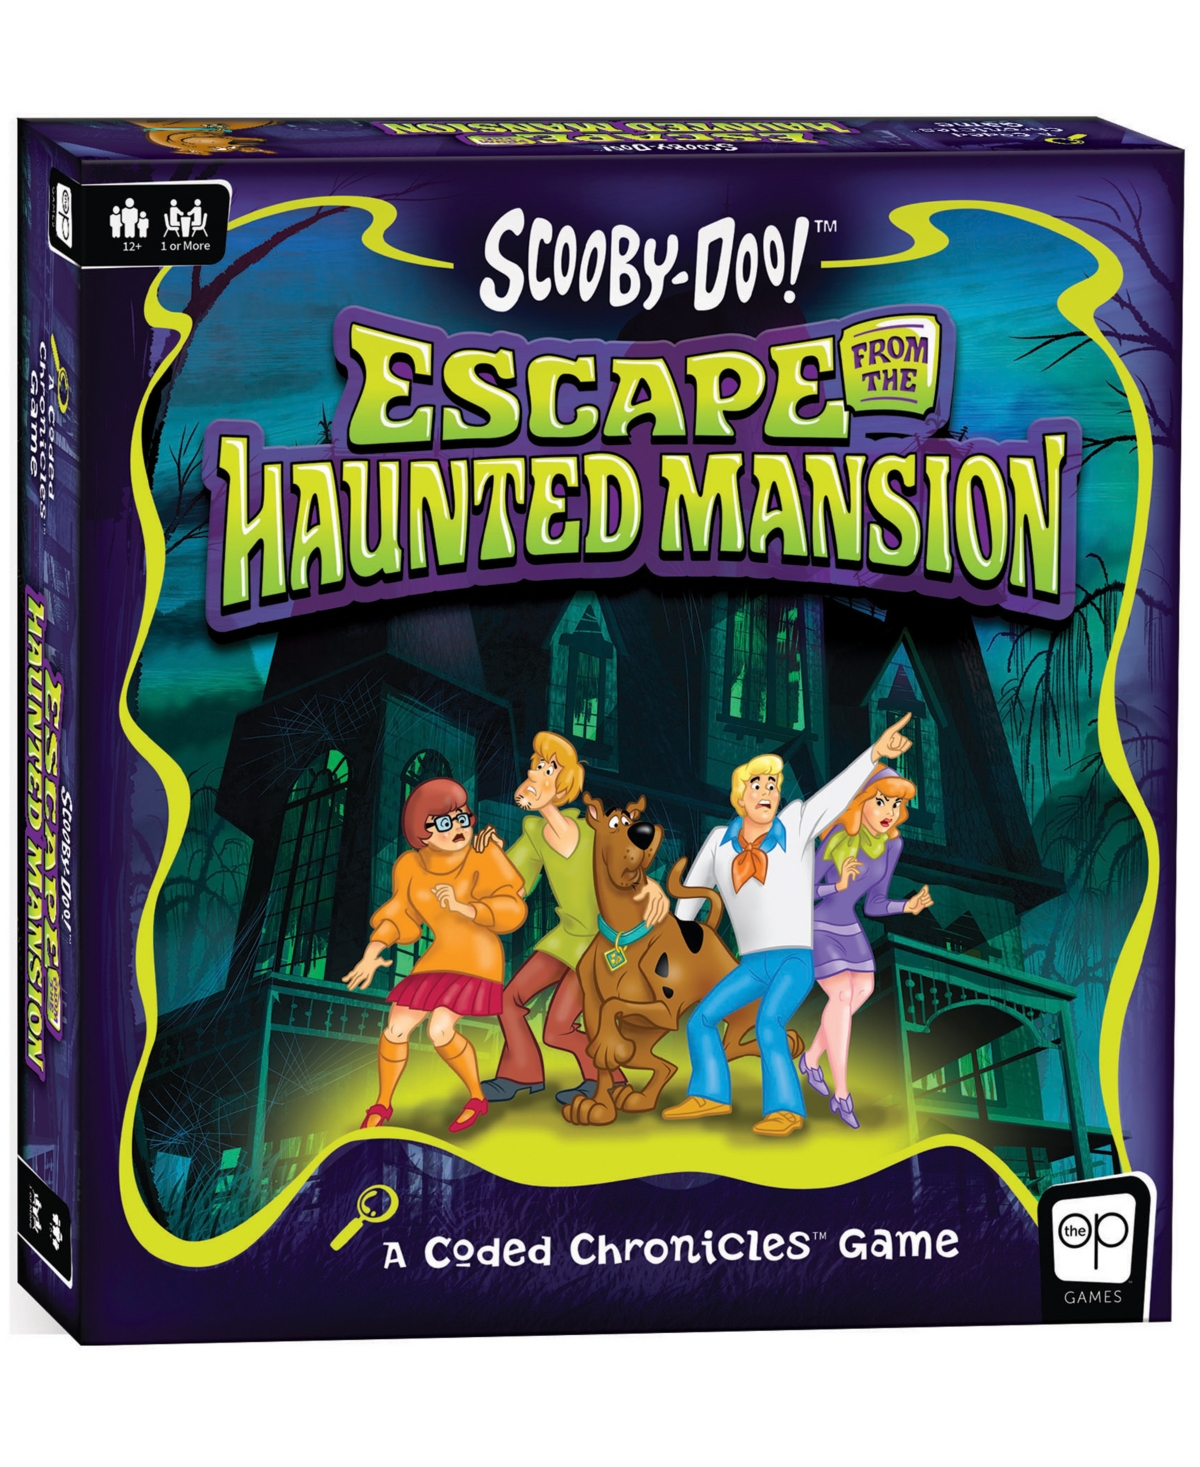 University Games Kids' Usaopoly Scooby-doo Escape From The Haunted Mansion Set, 93 Piece In Multi Color